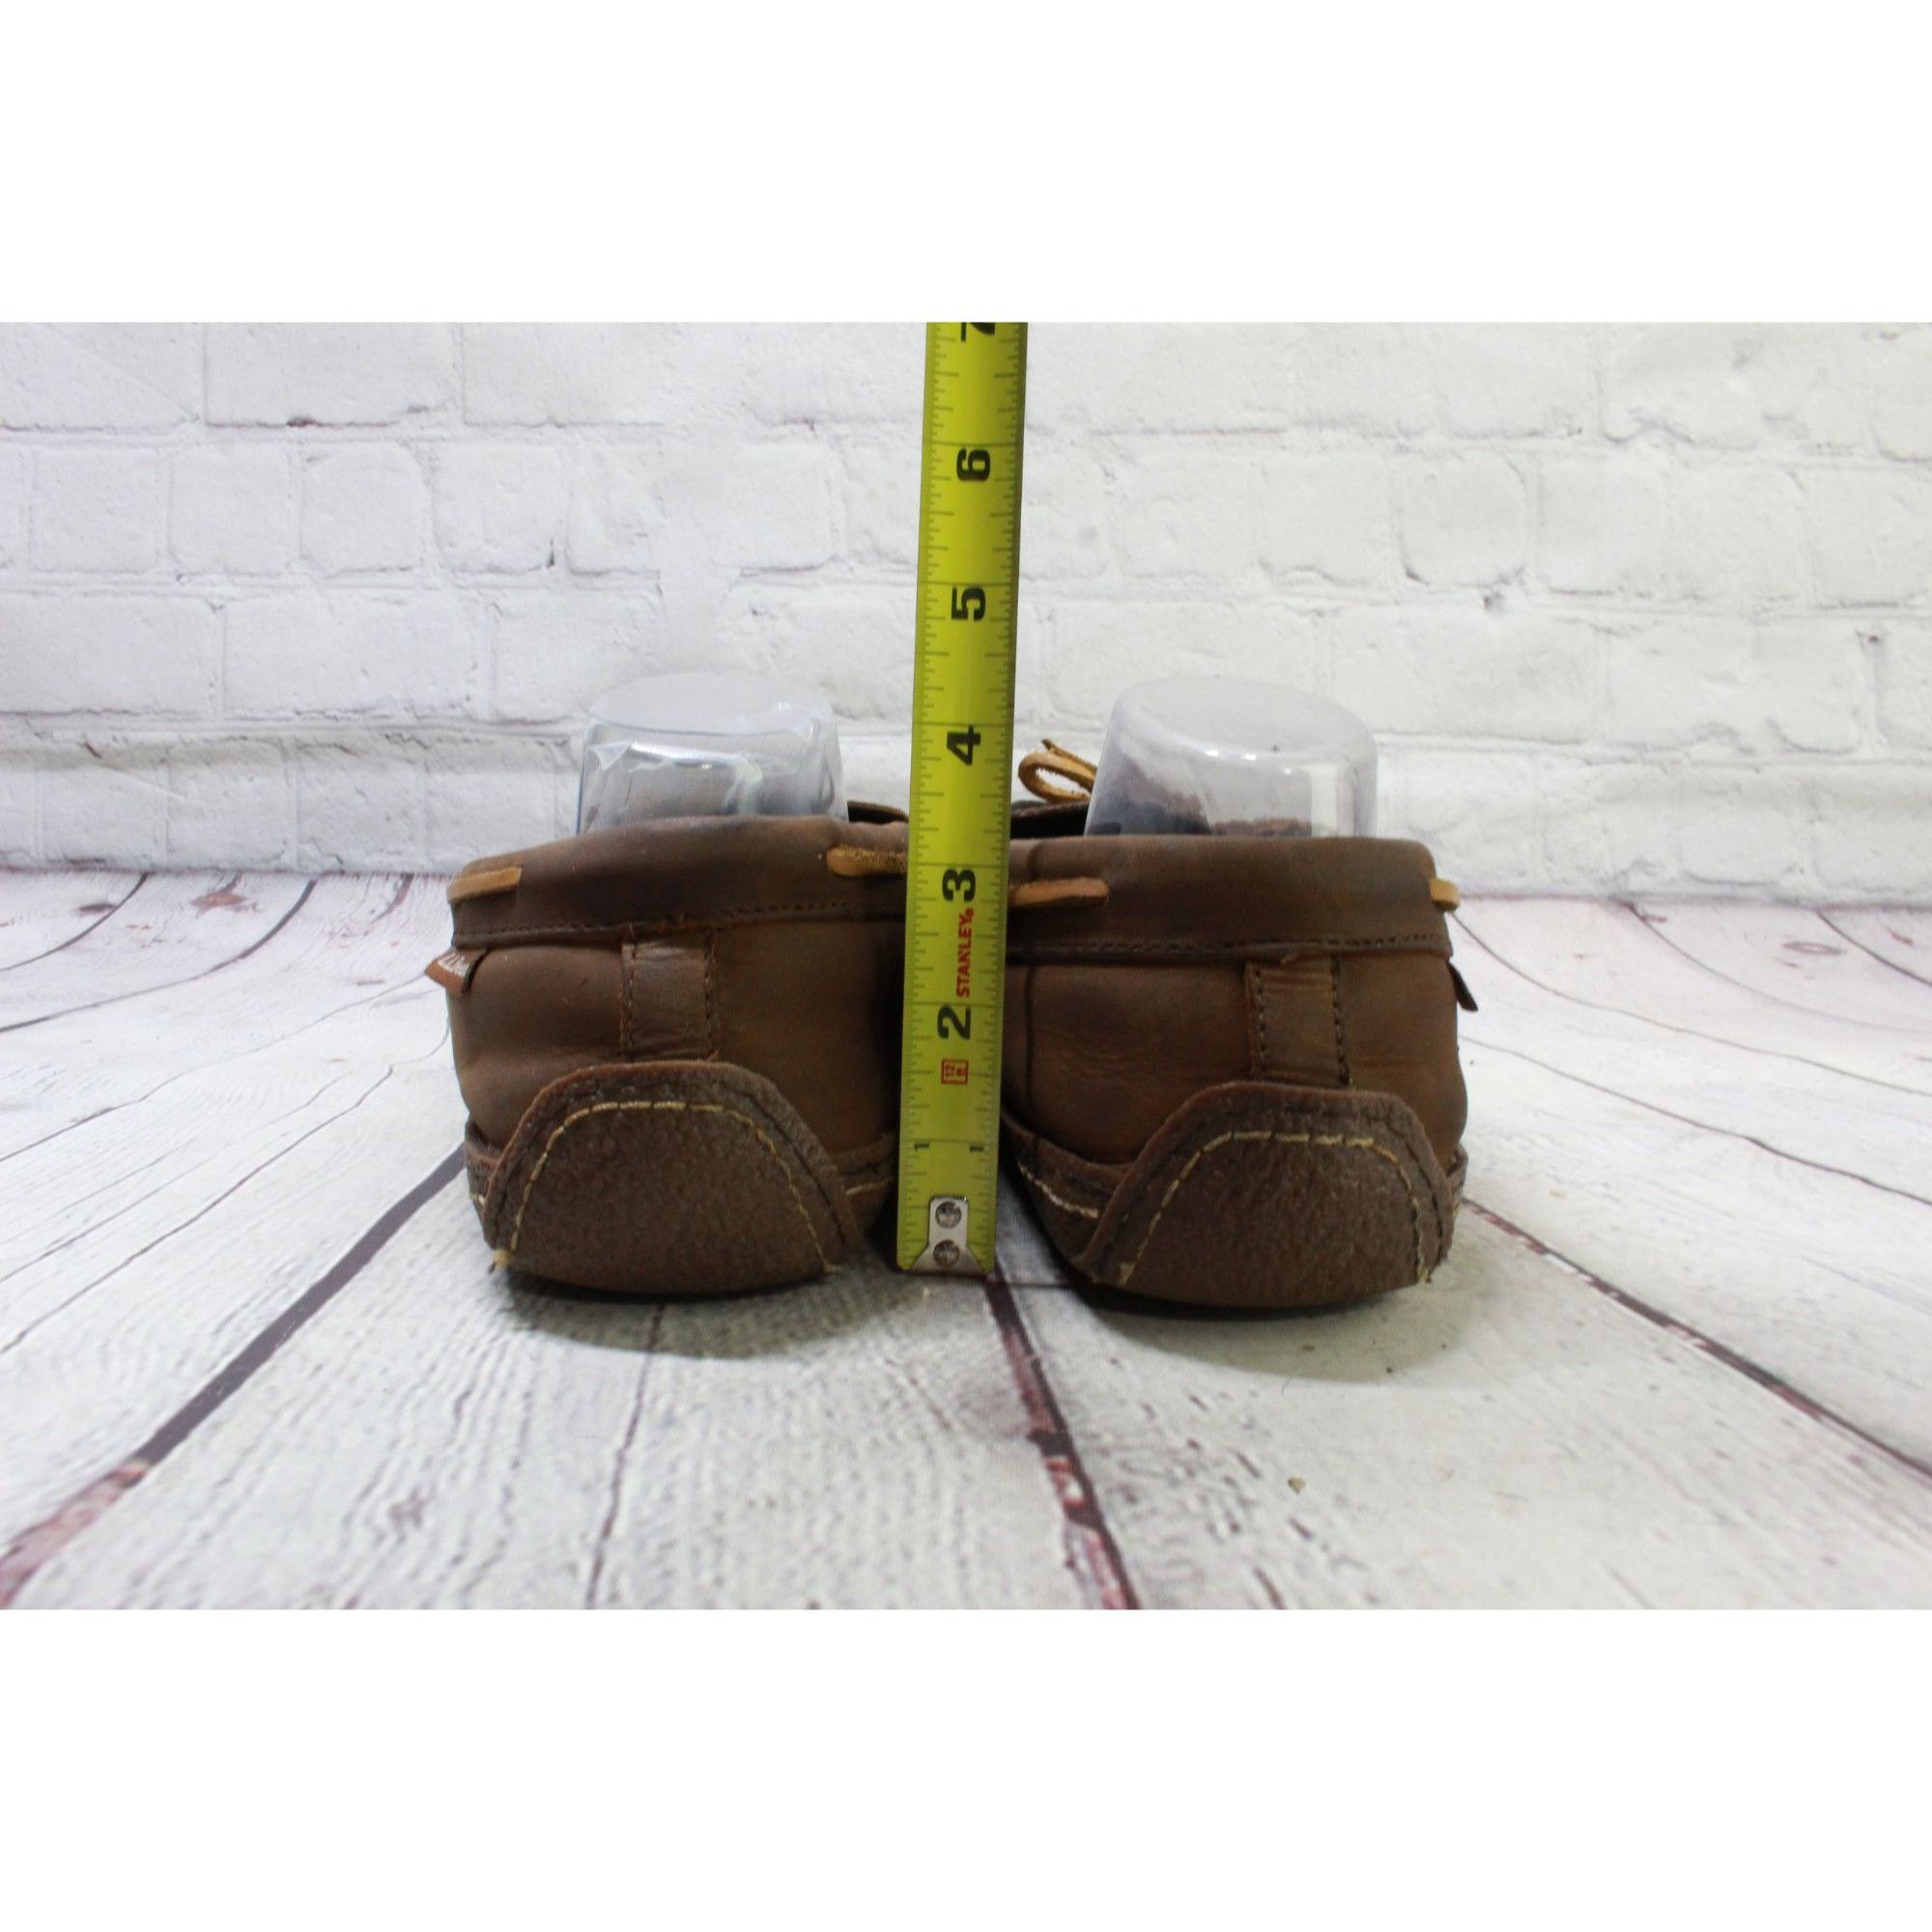 L.L. Bean LL Bean Men's Brown Leather Flannel-Lined Handsewn Slippers Size US 12 / EU 45 - 6 Thumbnail